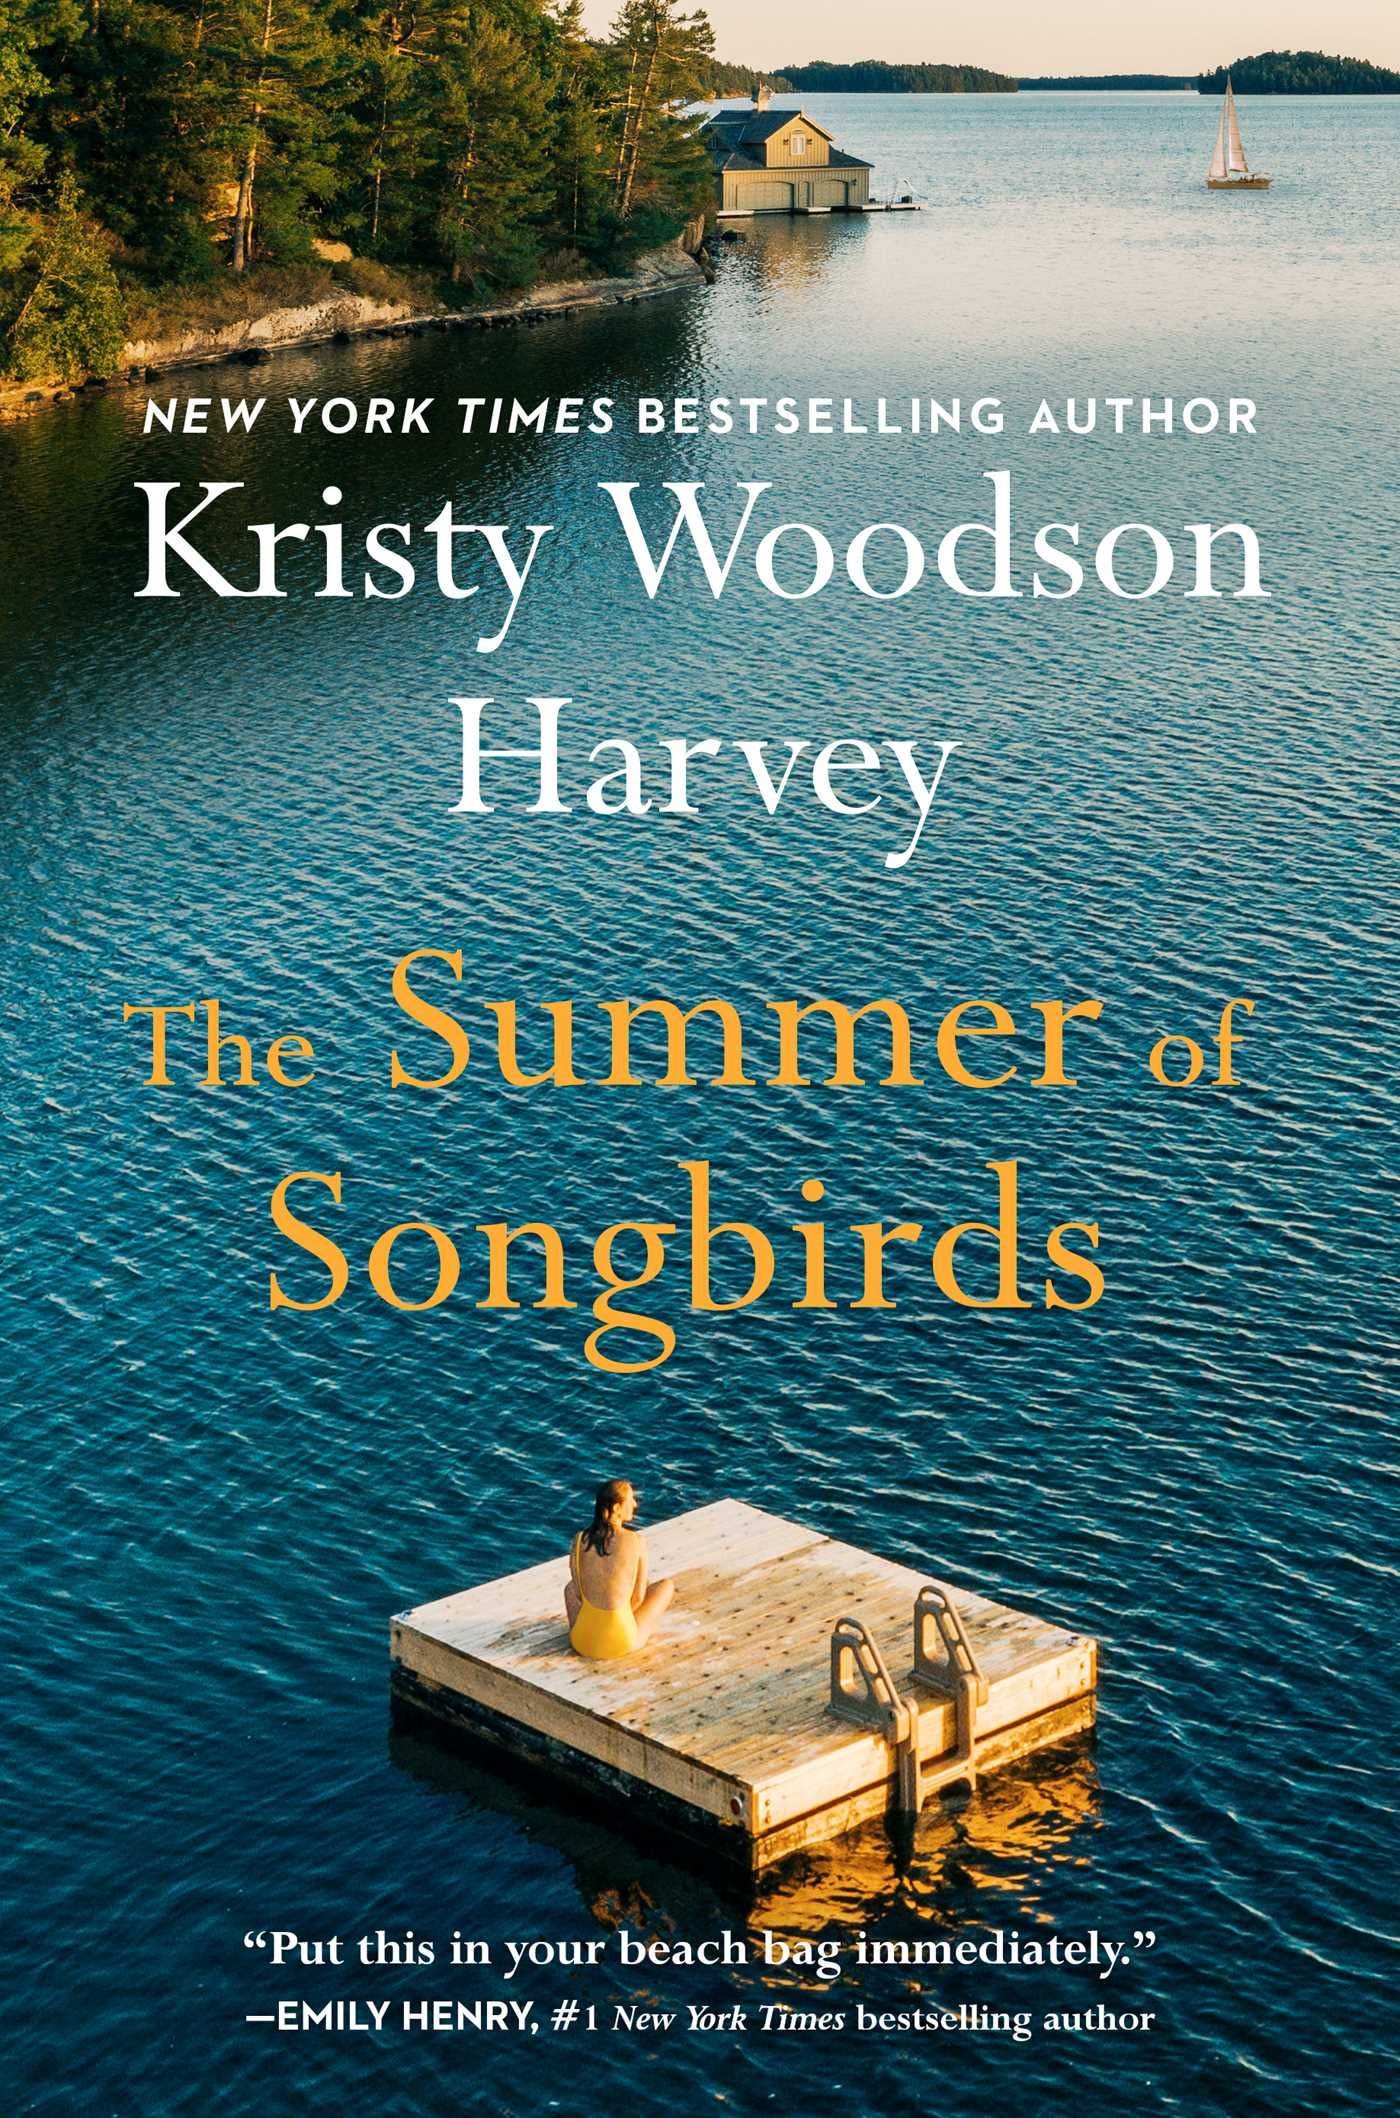 Image for "The Summer of Songbirds"